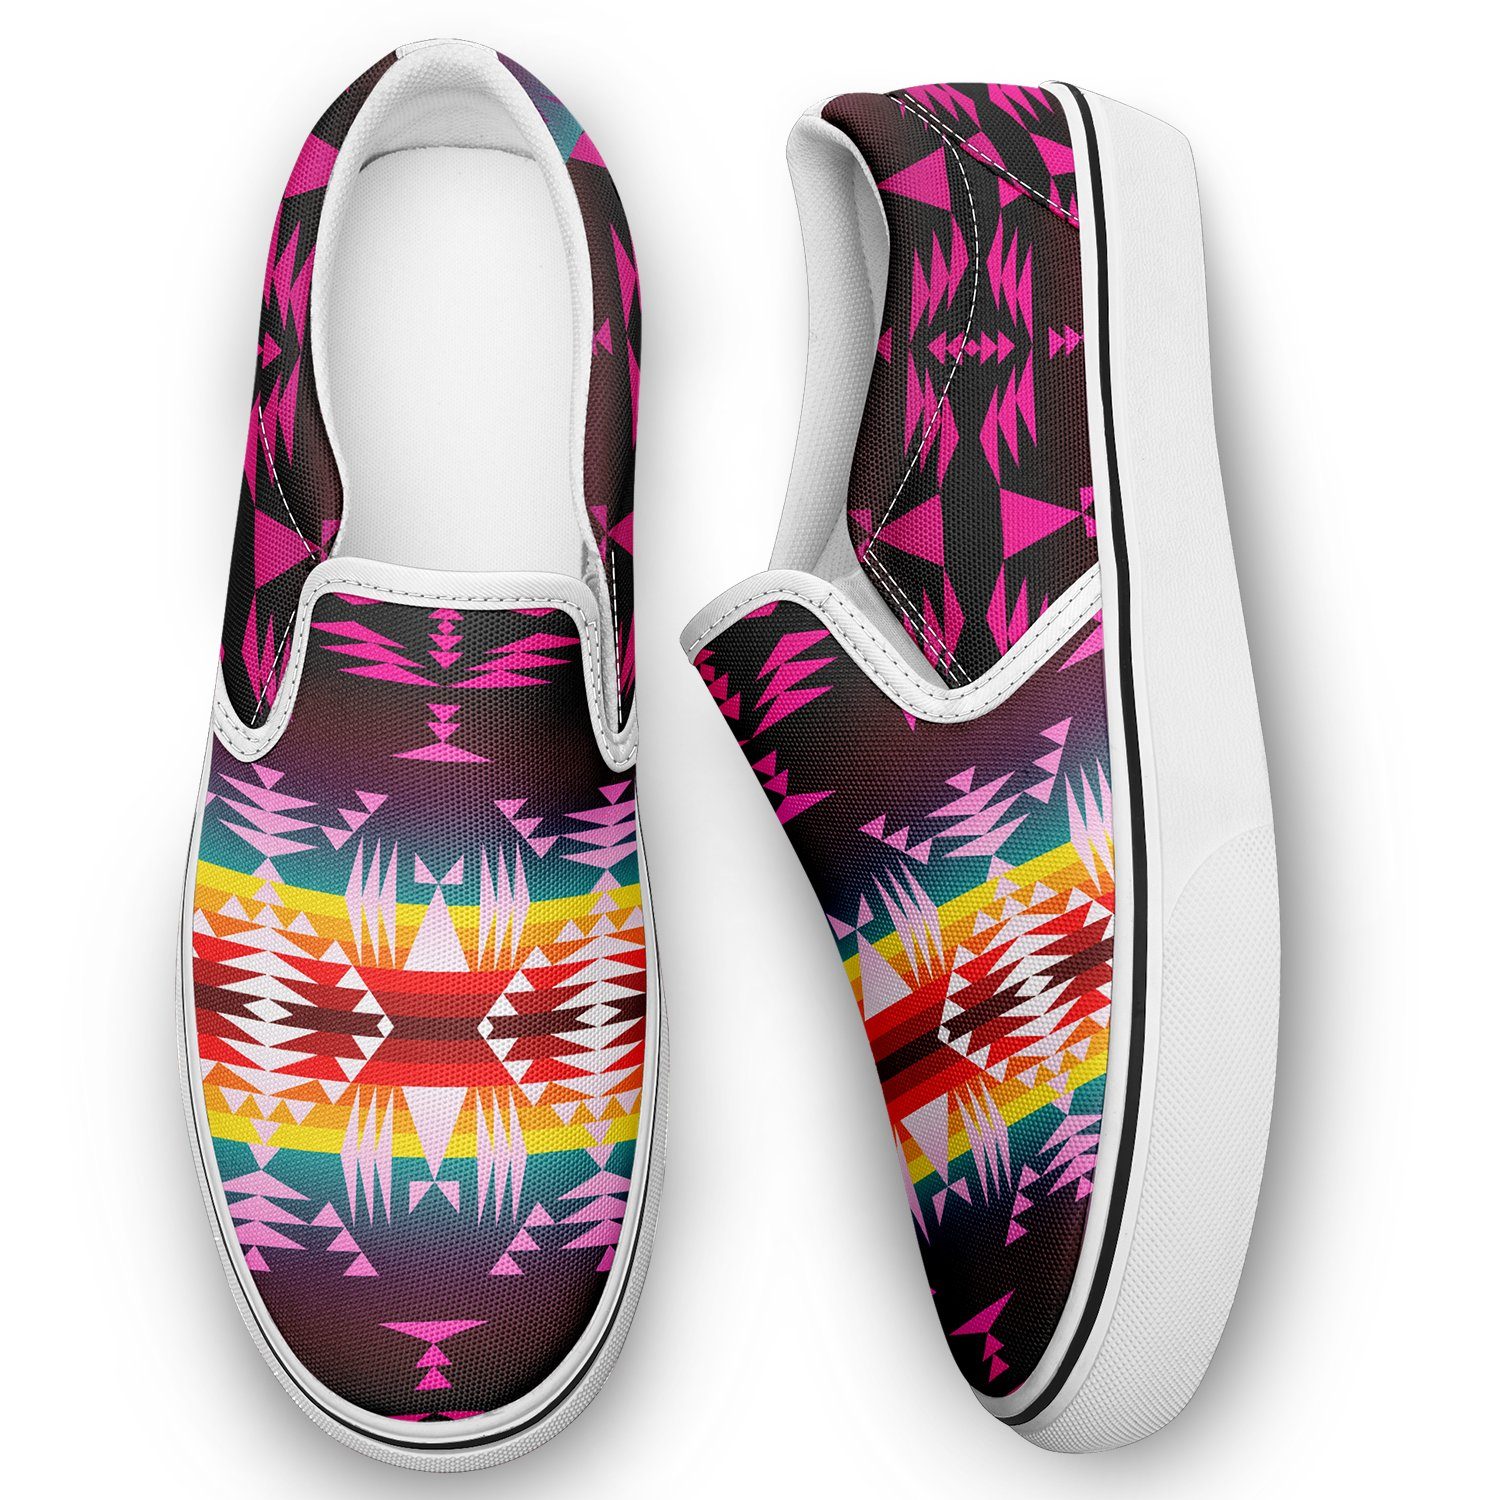 Between the Appalachian Mountains Otoyimm Kid's Canvas Slip On Shoes otoyimm Herman 